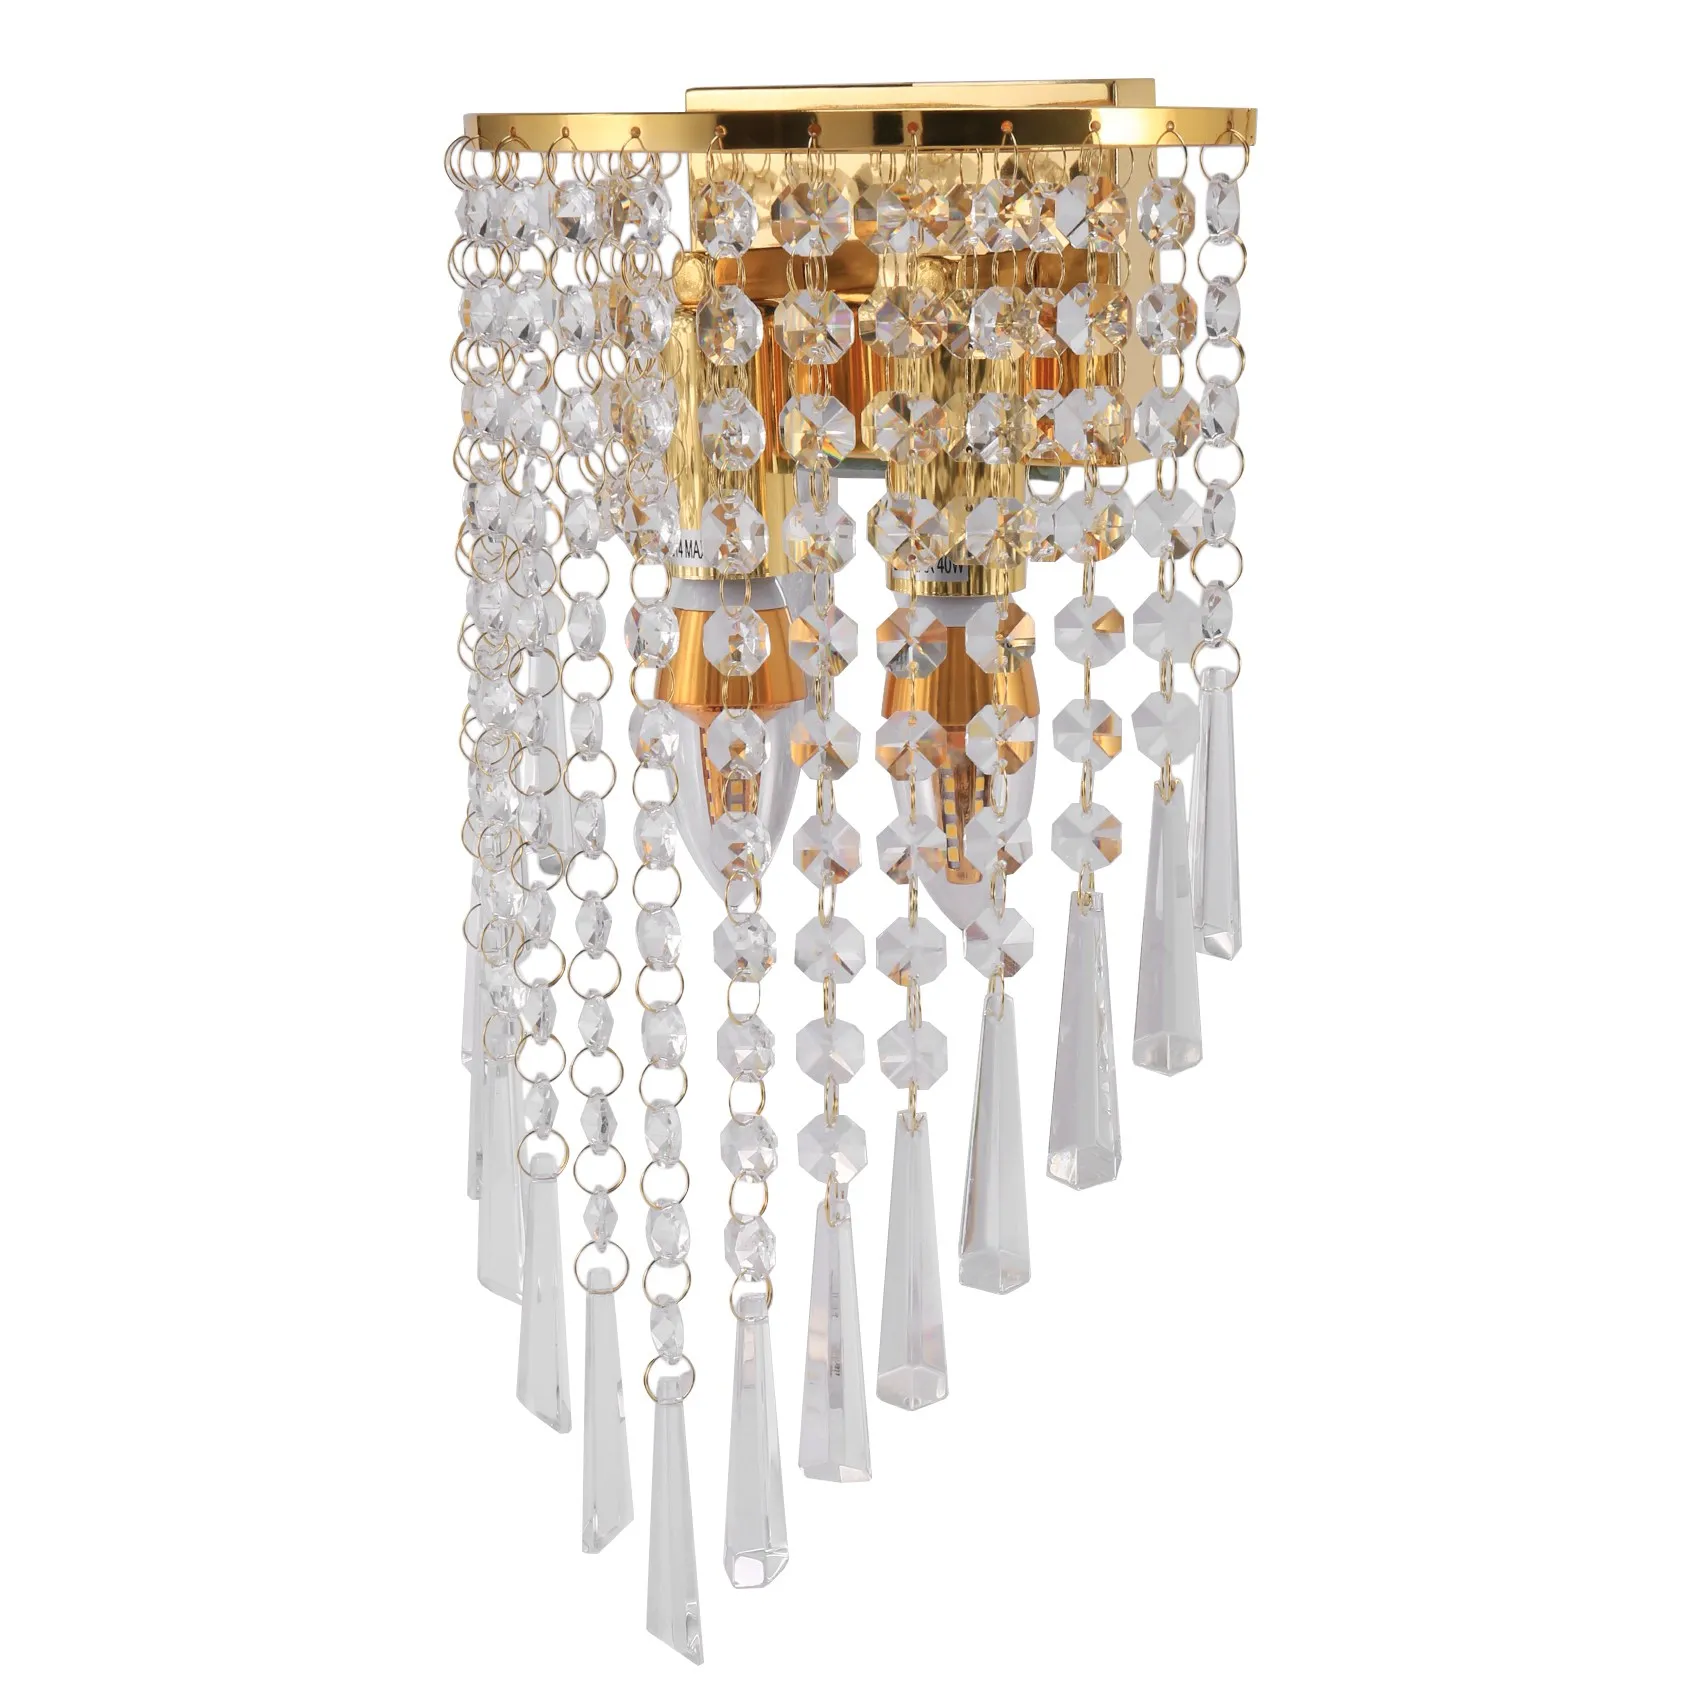 

5W Modern Crystal Wall Light LED Wall Sconce Wall Lamp E14 Bedside Lamp AC220V -Gold